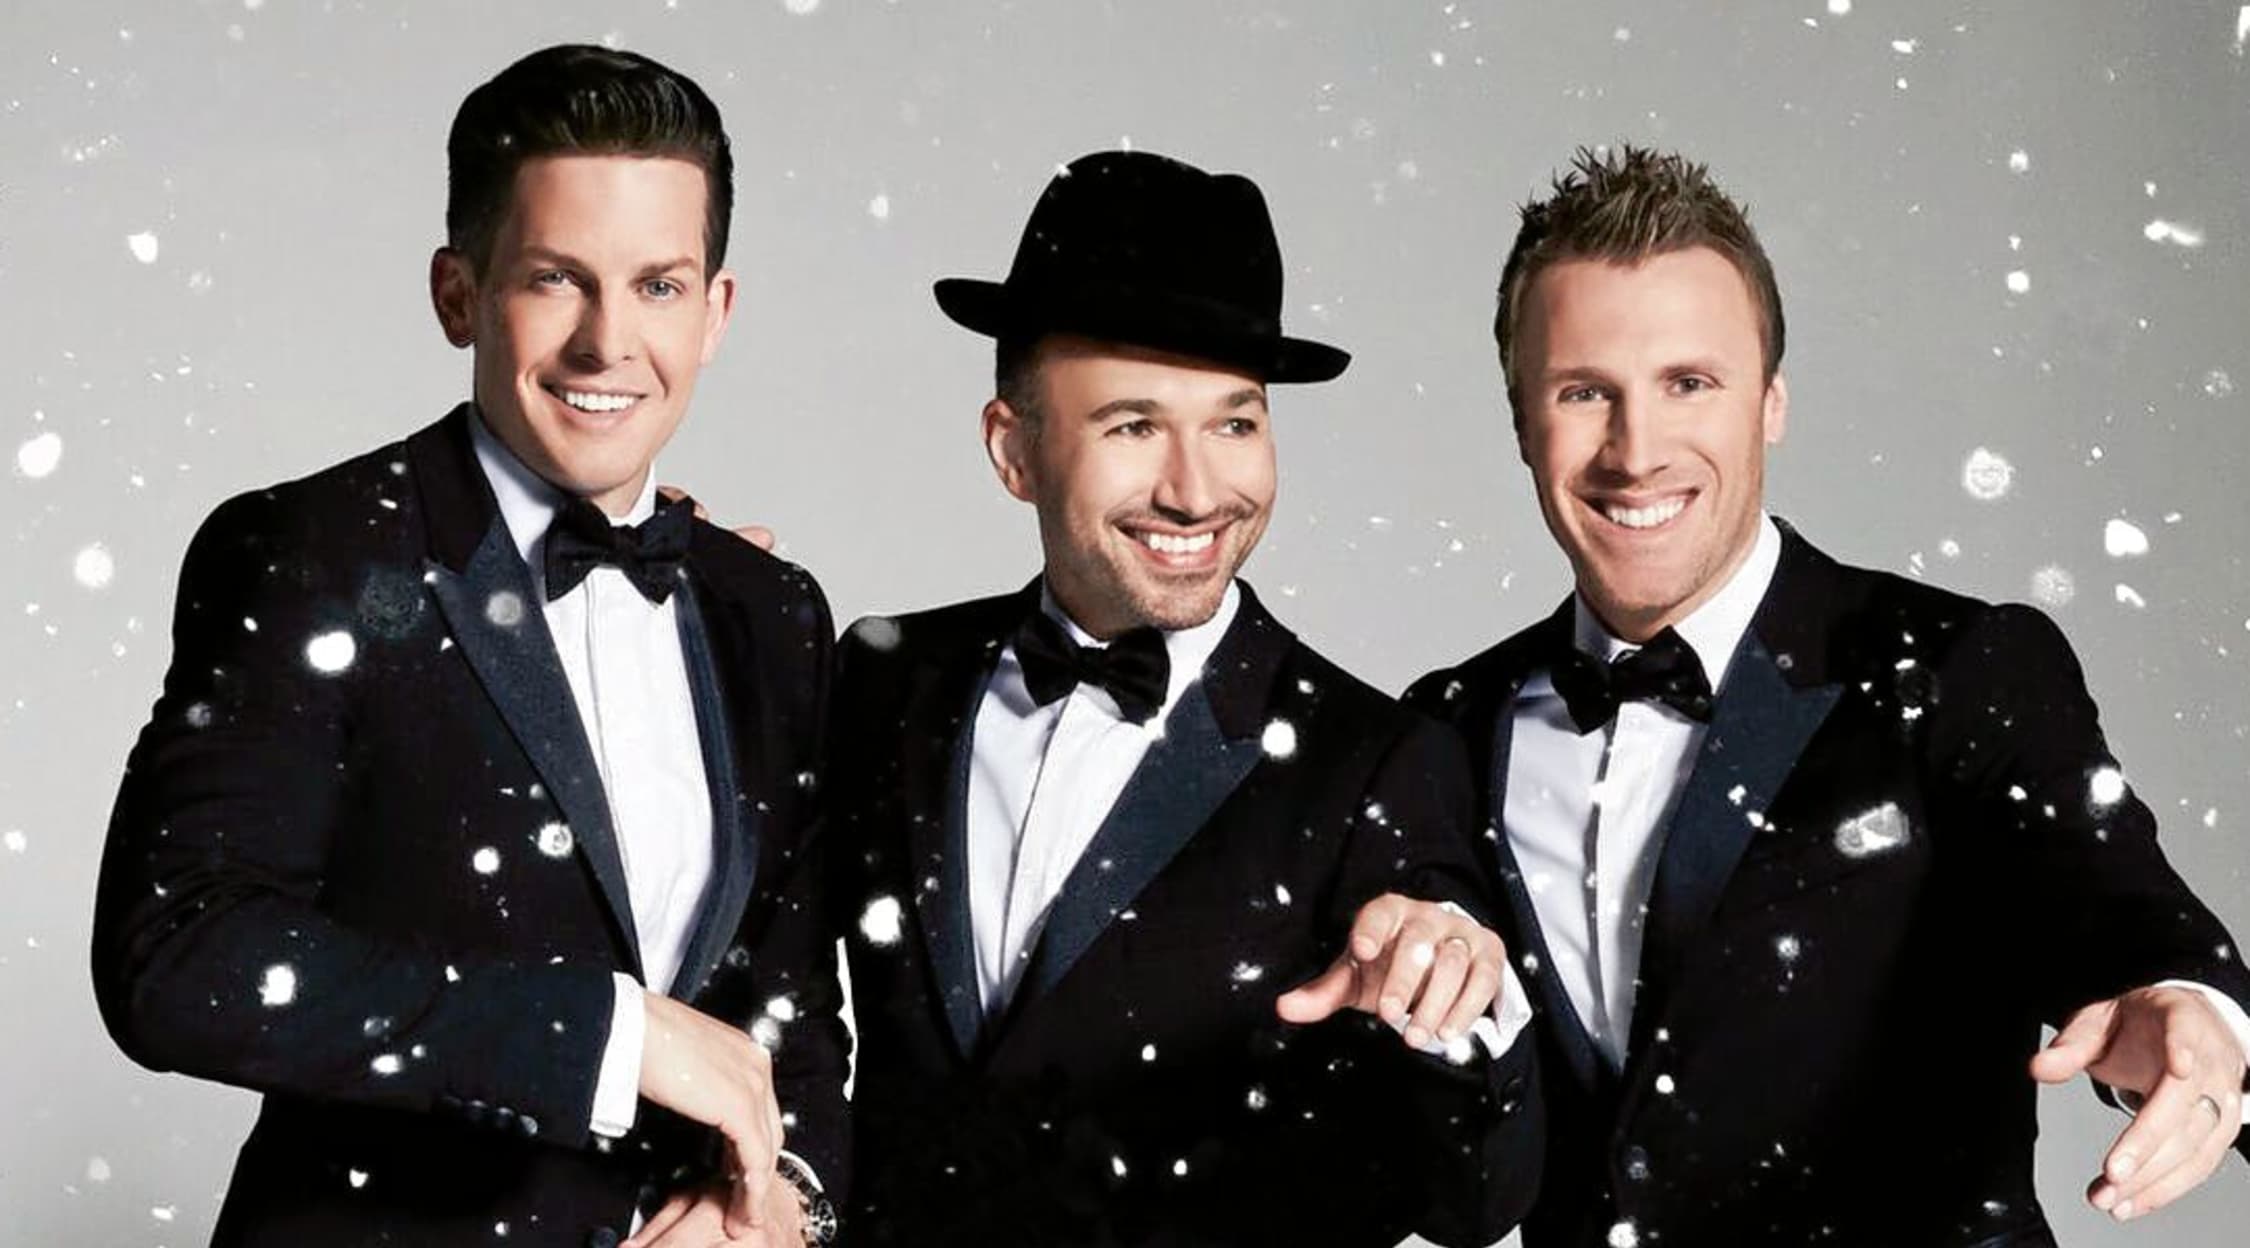 The Tenors Tickets The Tenors Concert Tickets and Tour Dates